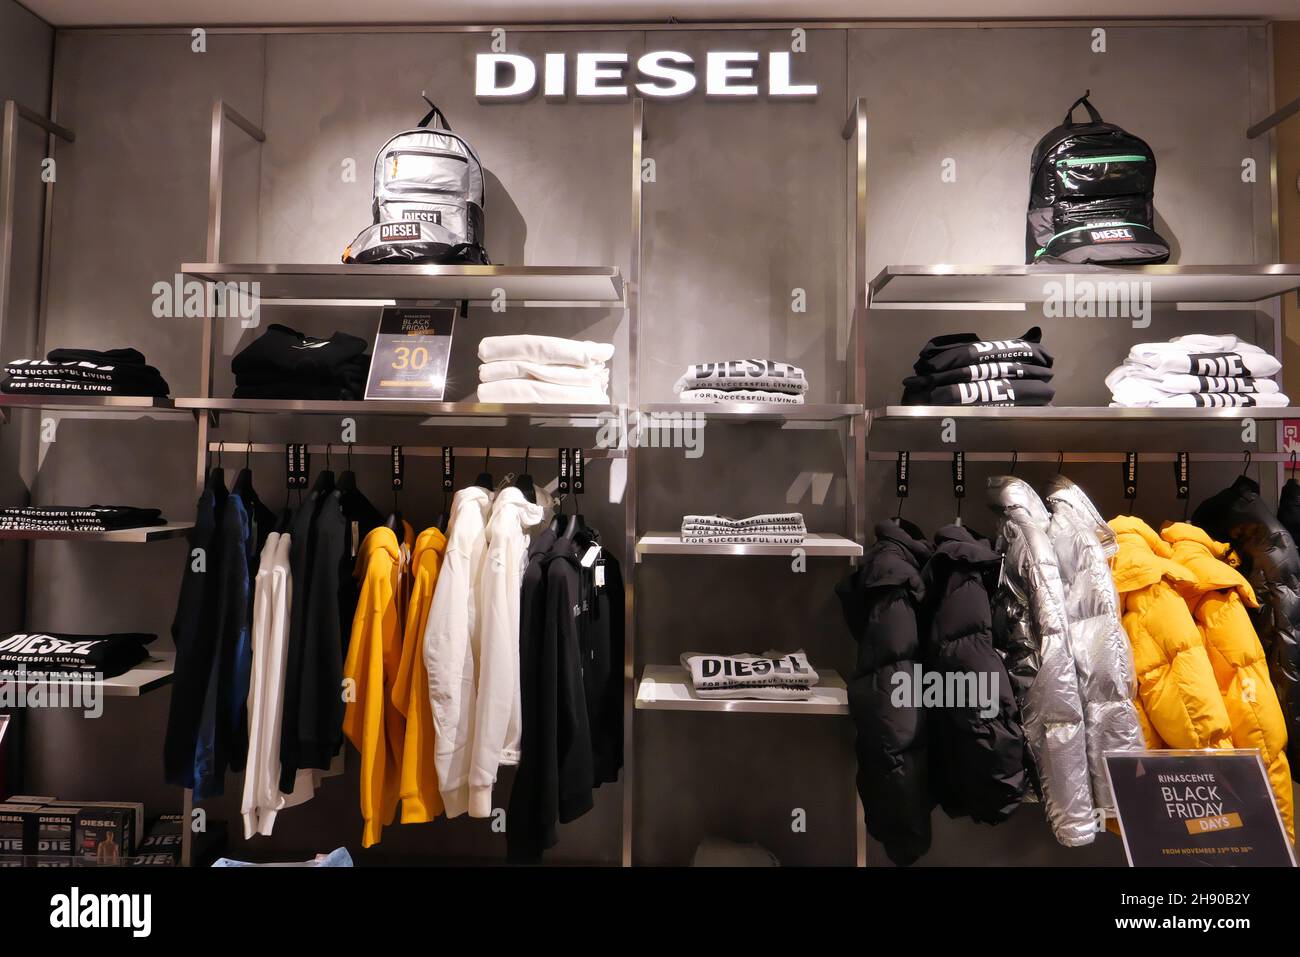 DIESEL CLOTHING ON DISPLAY INSIDE THE FASHION STORE Stock Photo - Alamy